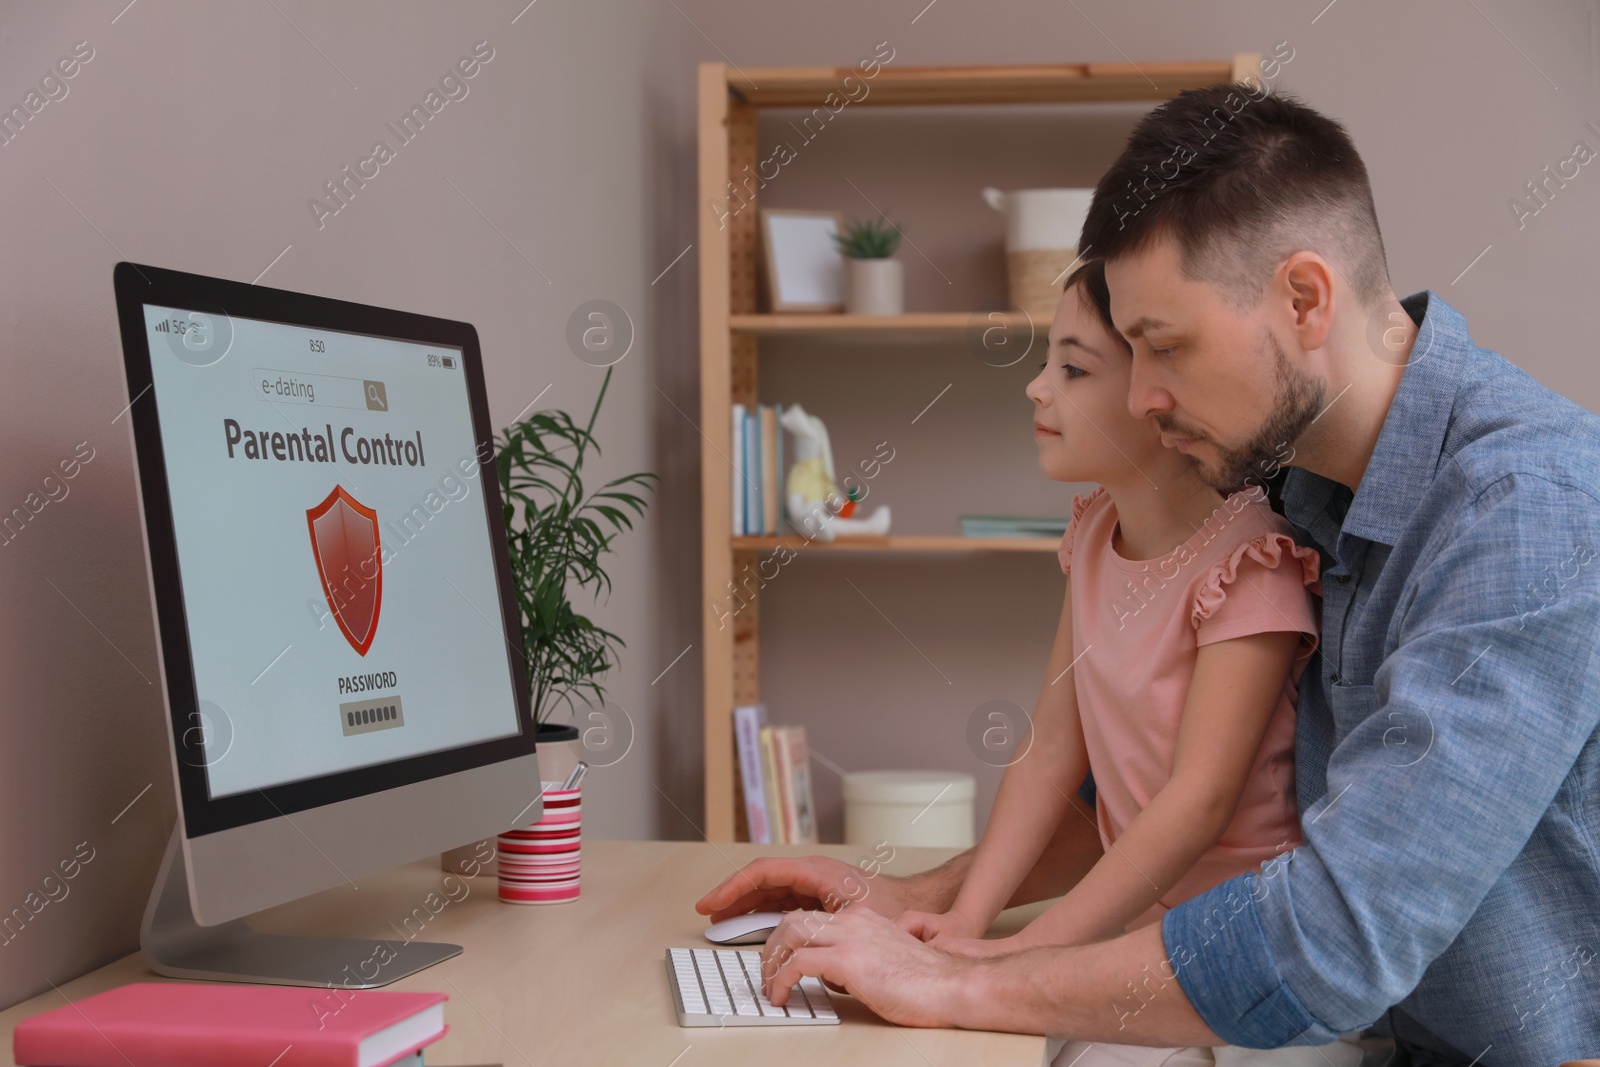 Photo of Dad installing parental control on computer at table indoors. Child safety